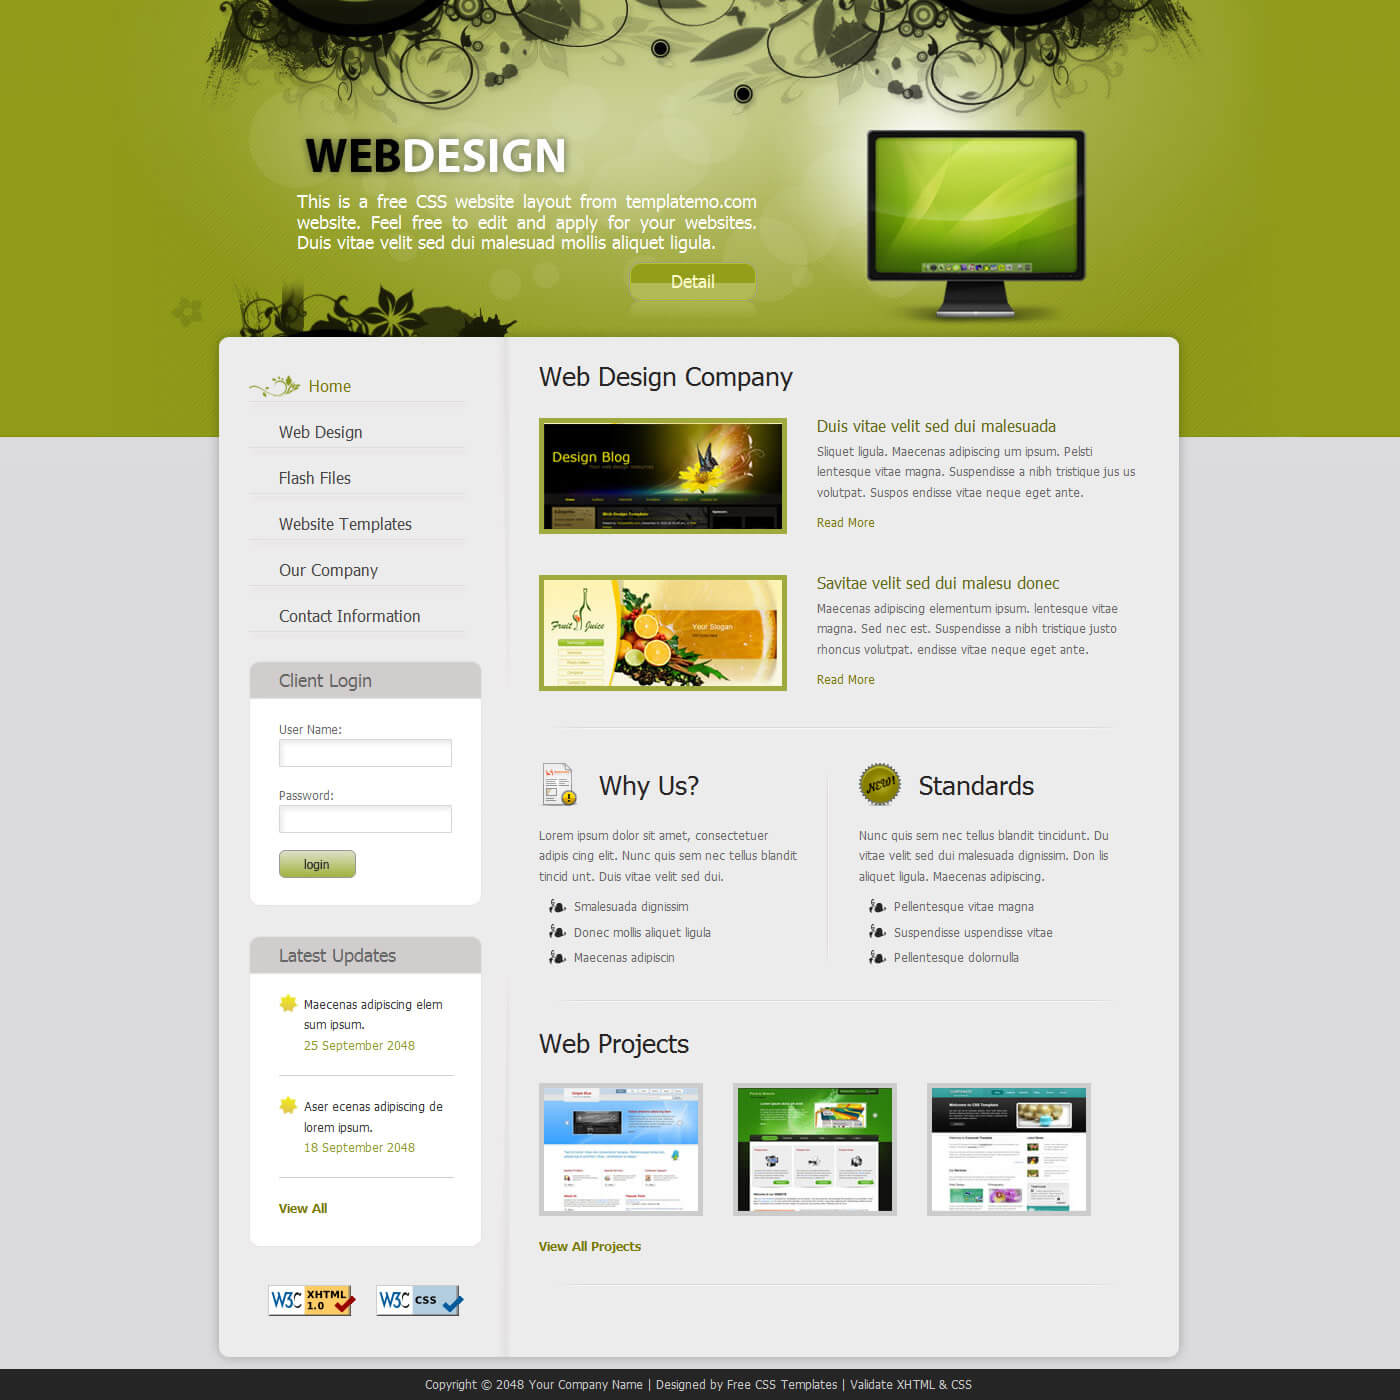 template design quick fast website easy cheap no support